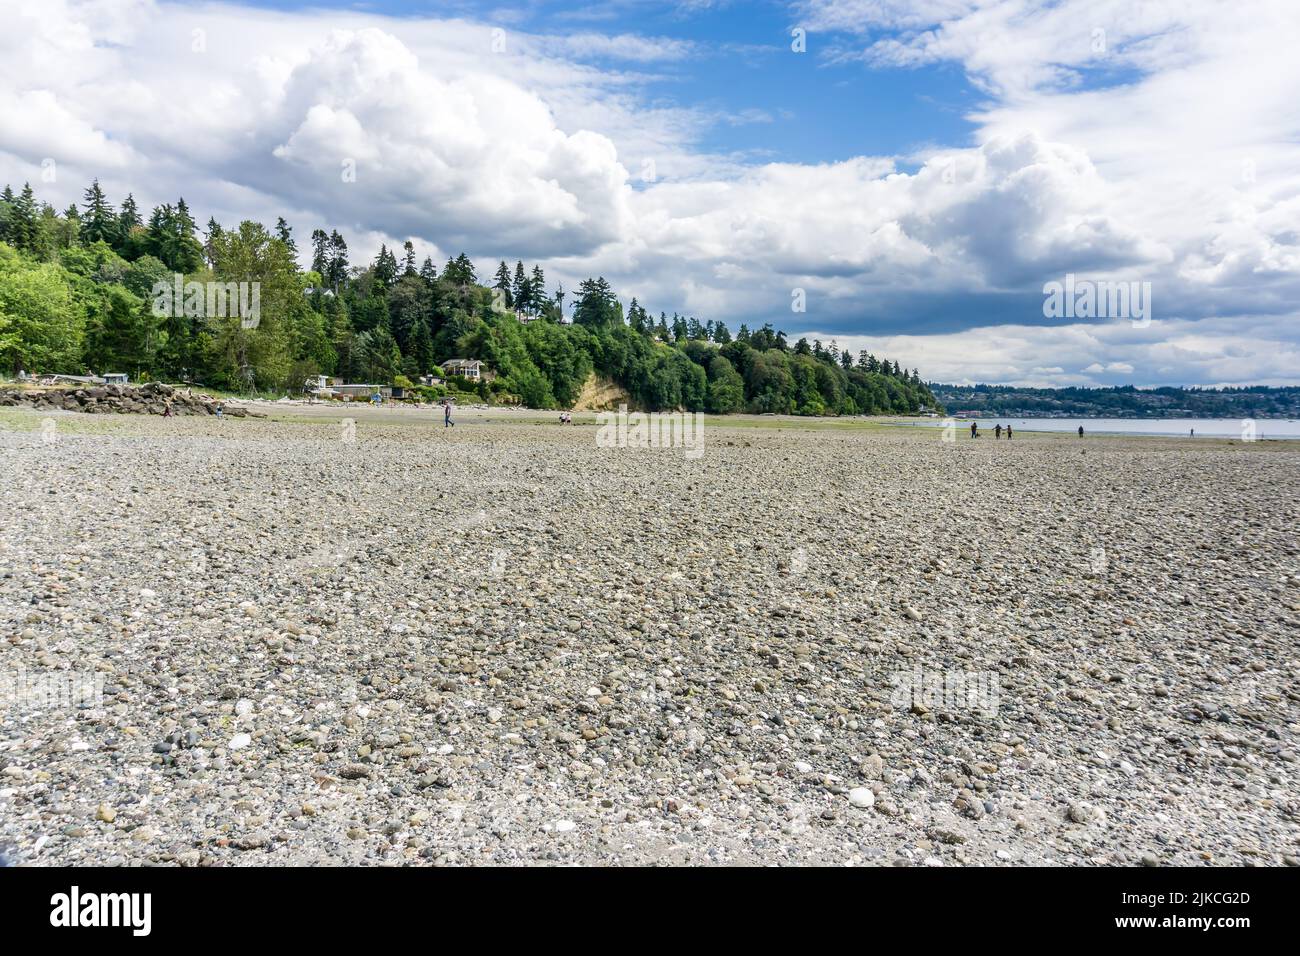 A view of the shoreline at Saltwater State Park in Des Moines, Washington. Stock Photo